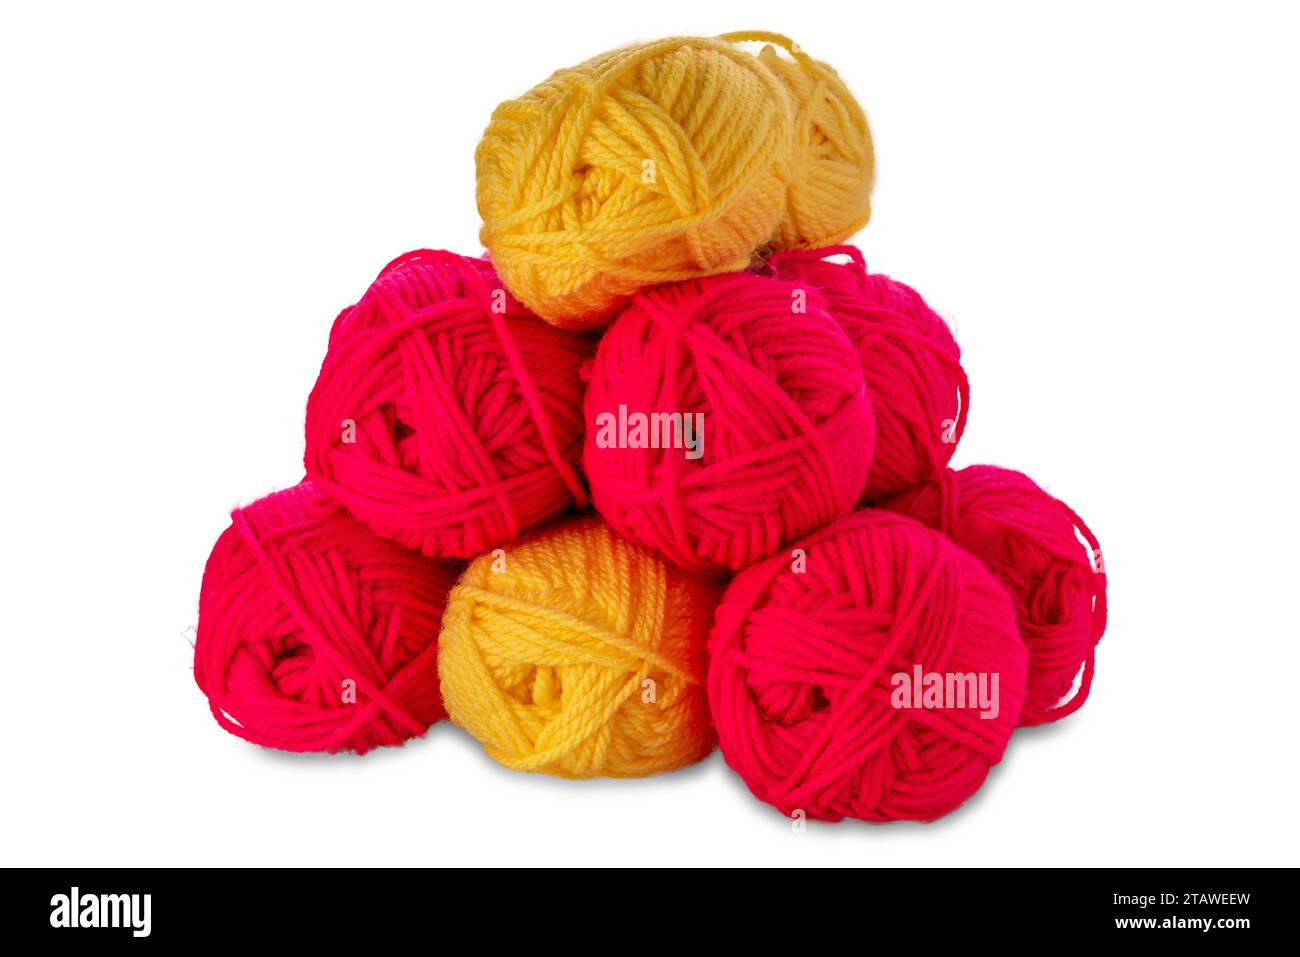 Balls of yellow and fuchsia-colored wool yarn isolated on white with clipping path included Stock Photo